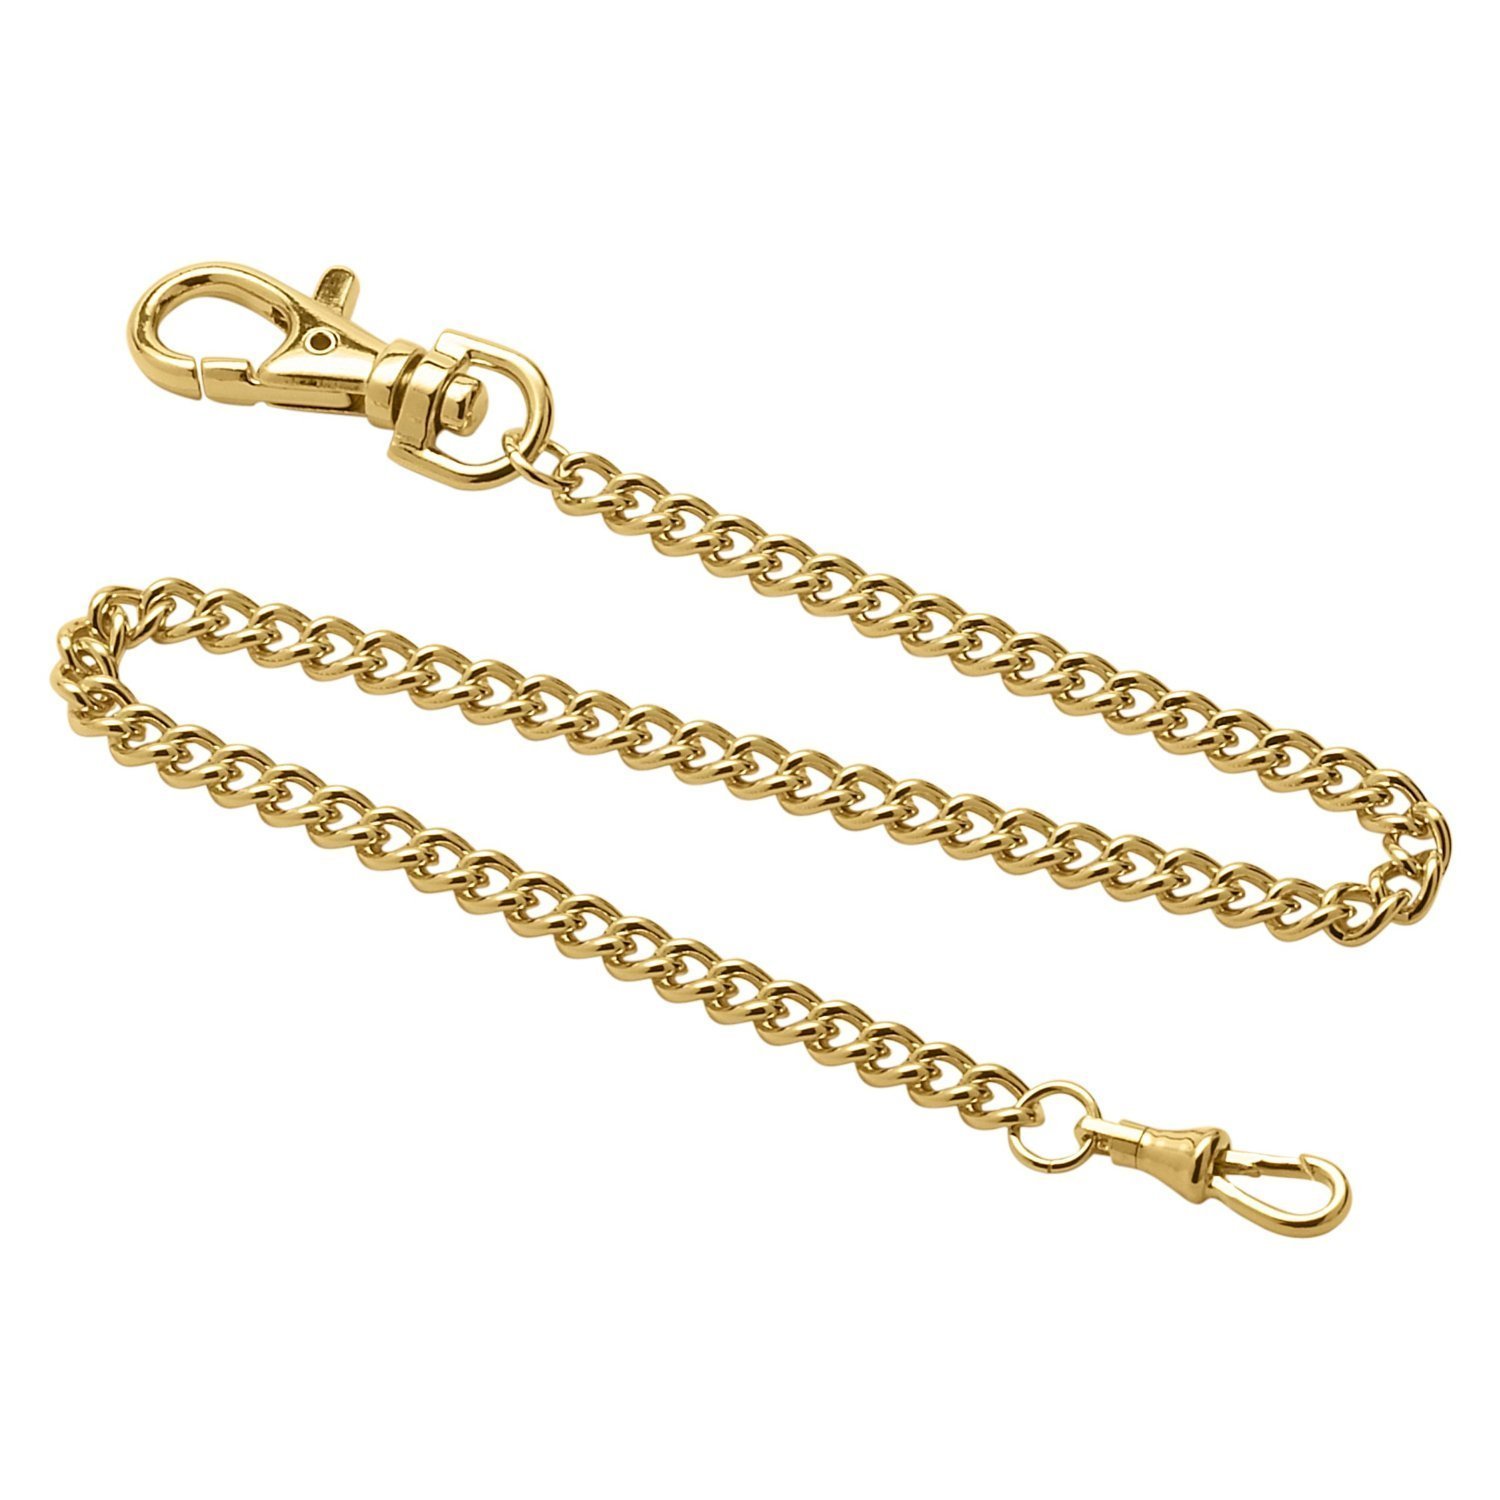 Dueber Stainless Steel Gold Plated Pocket Watch Chain 3548-G